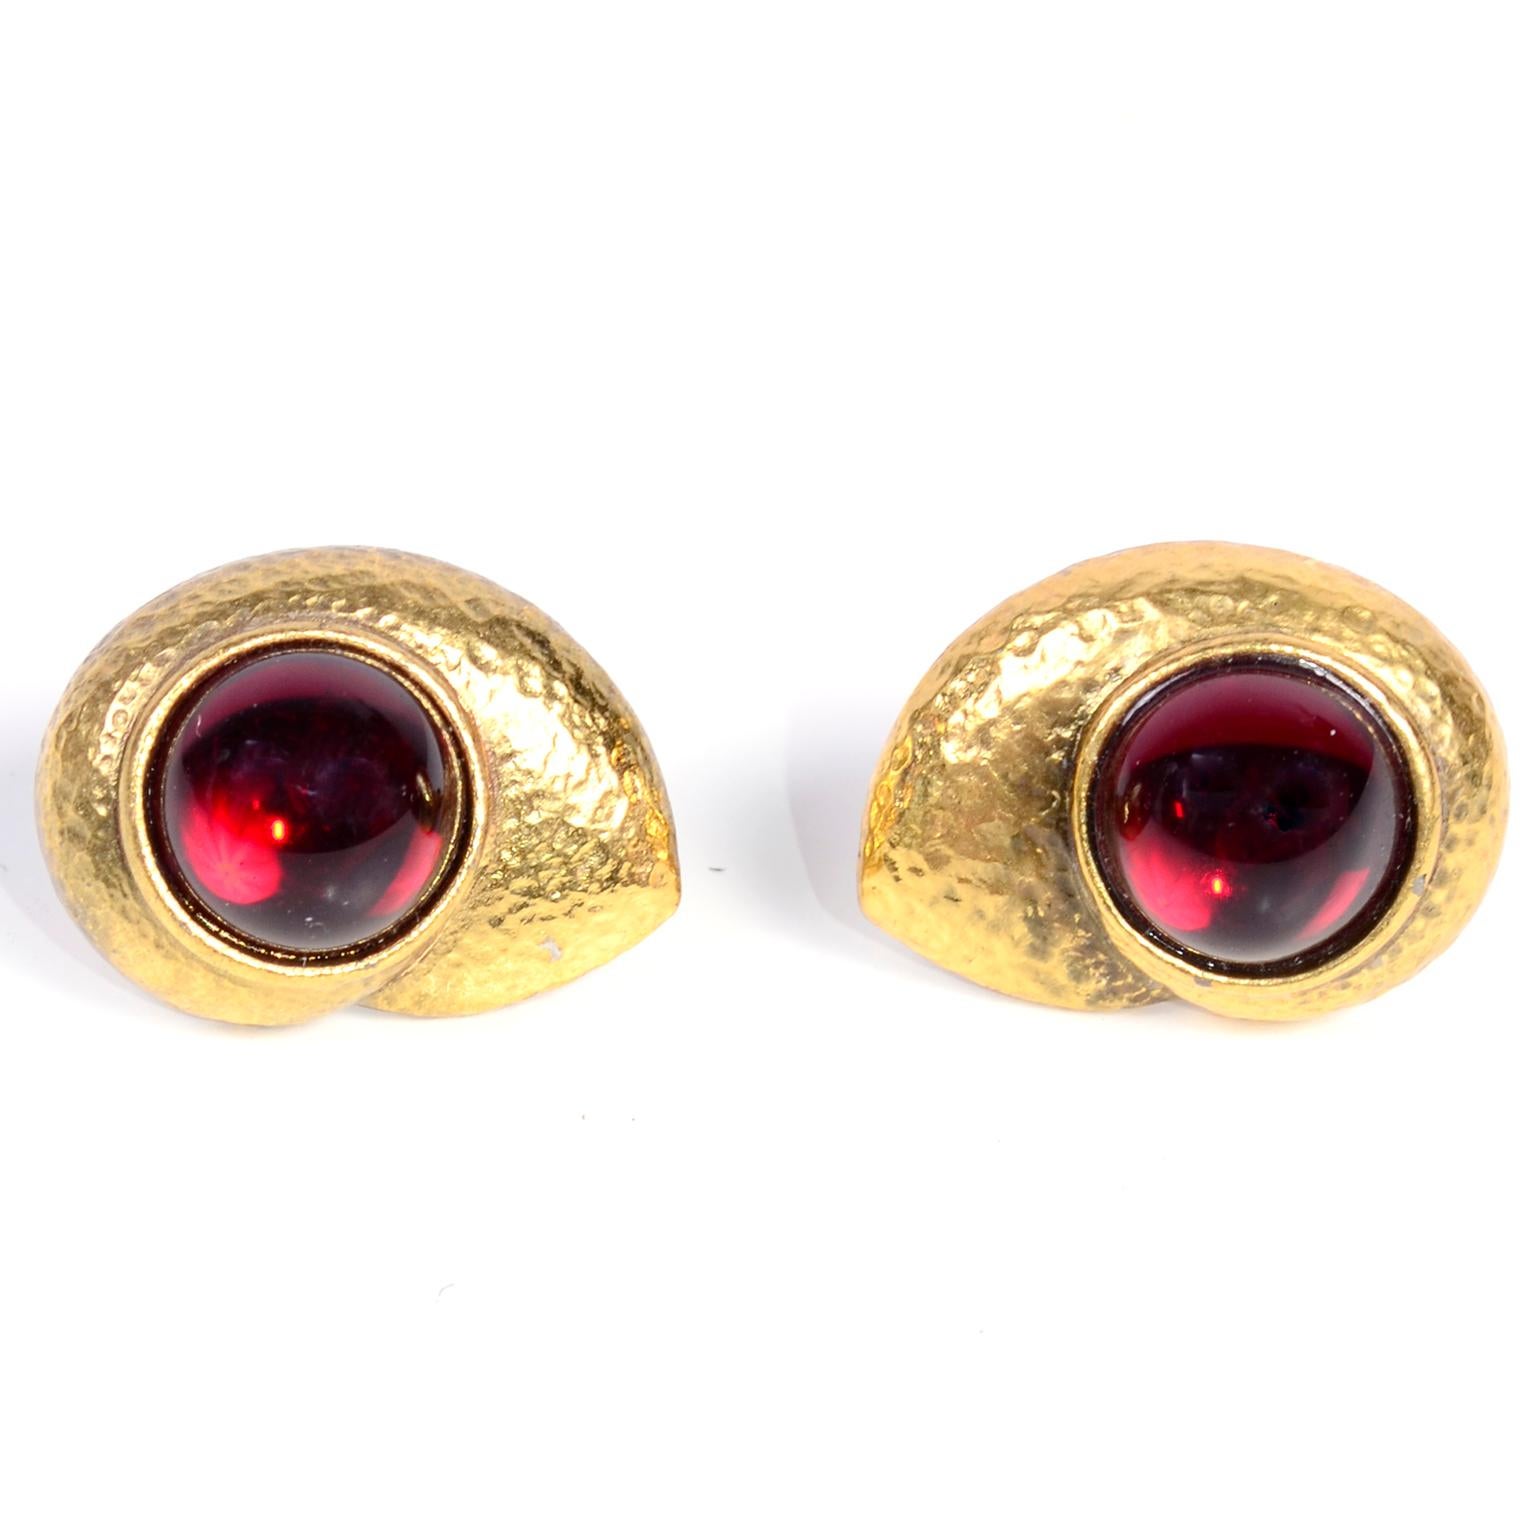 Yves Saint Laurent YSL Vintage Pierced Earrings With Red Cabochons in Gold Metal 1